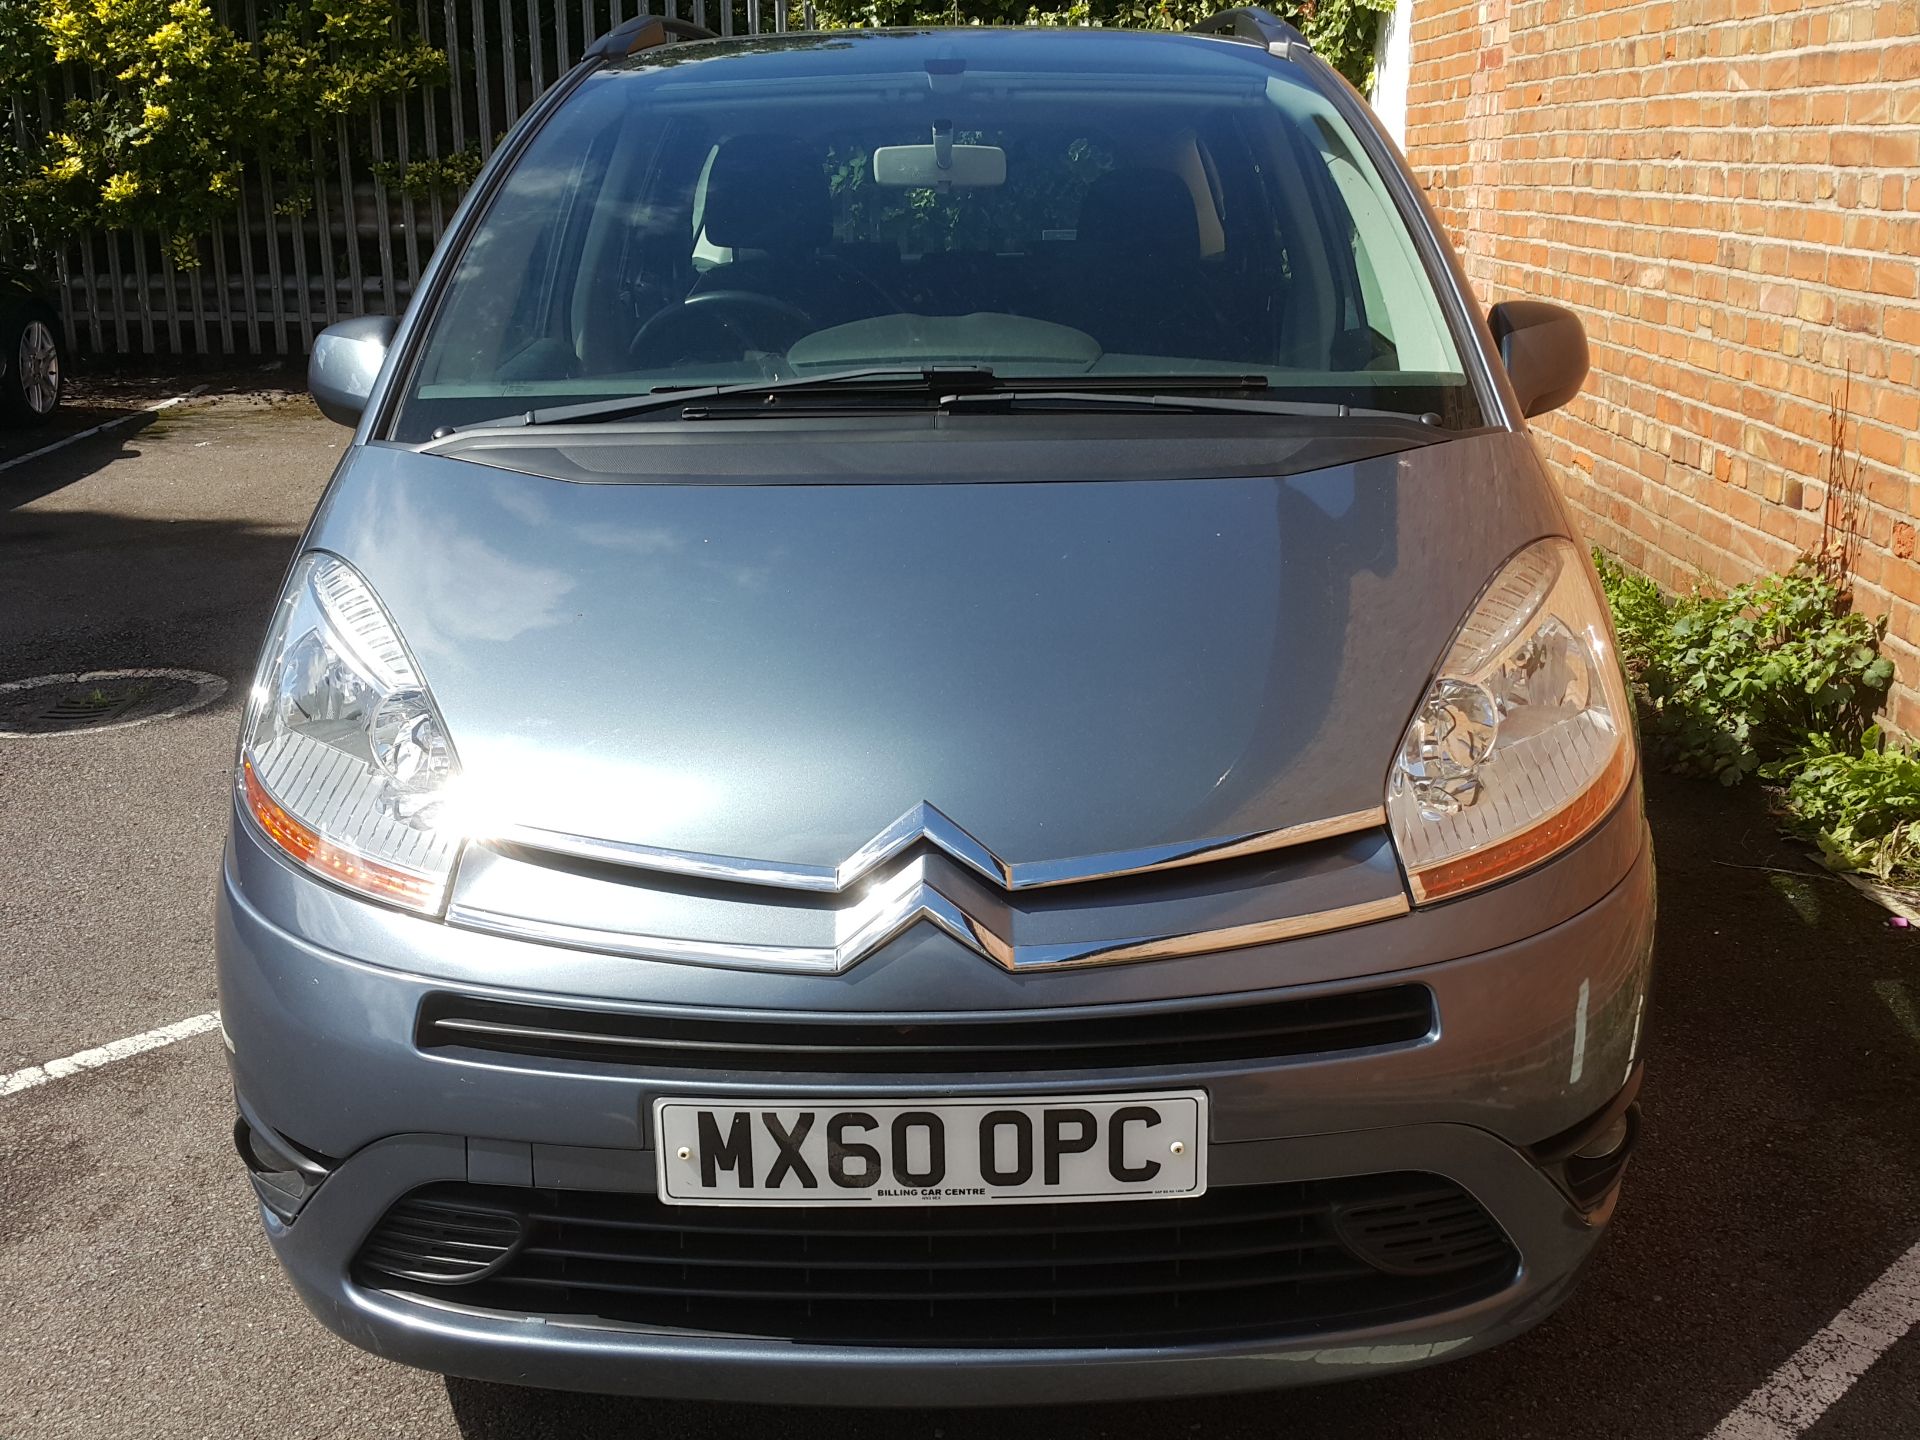 CITROEN C4 GRAND PICASSO VTR+ 7 SEATER - Image 2 of 19